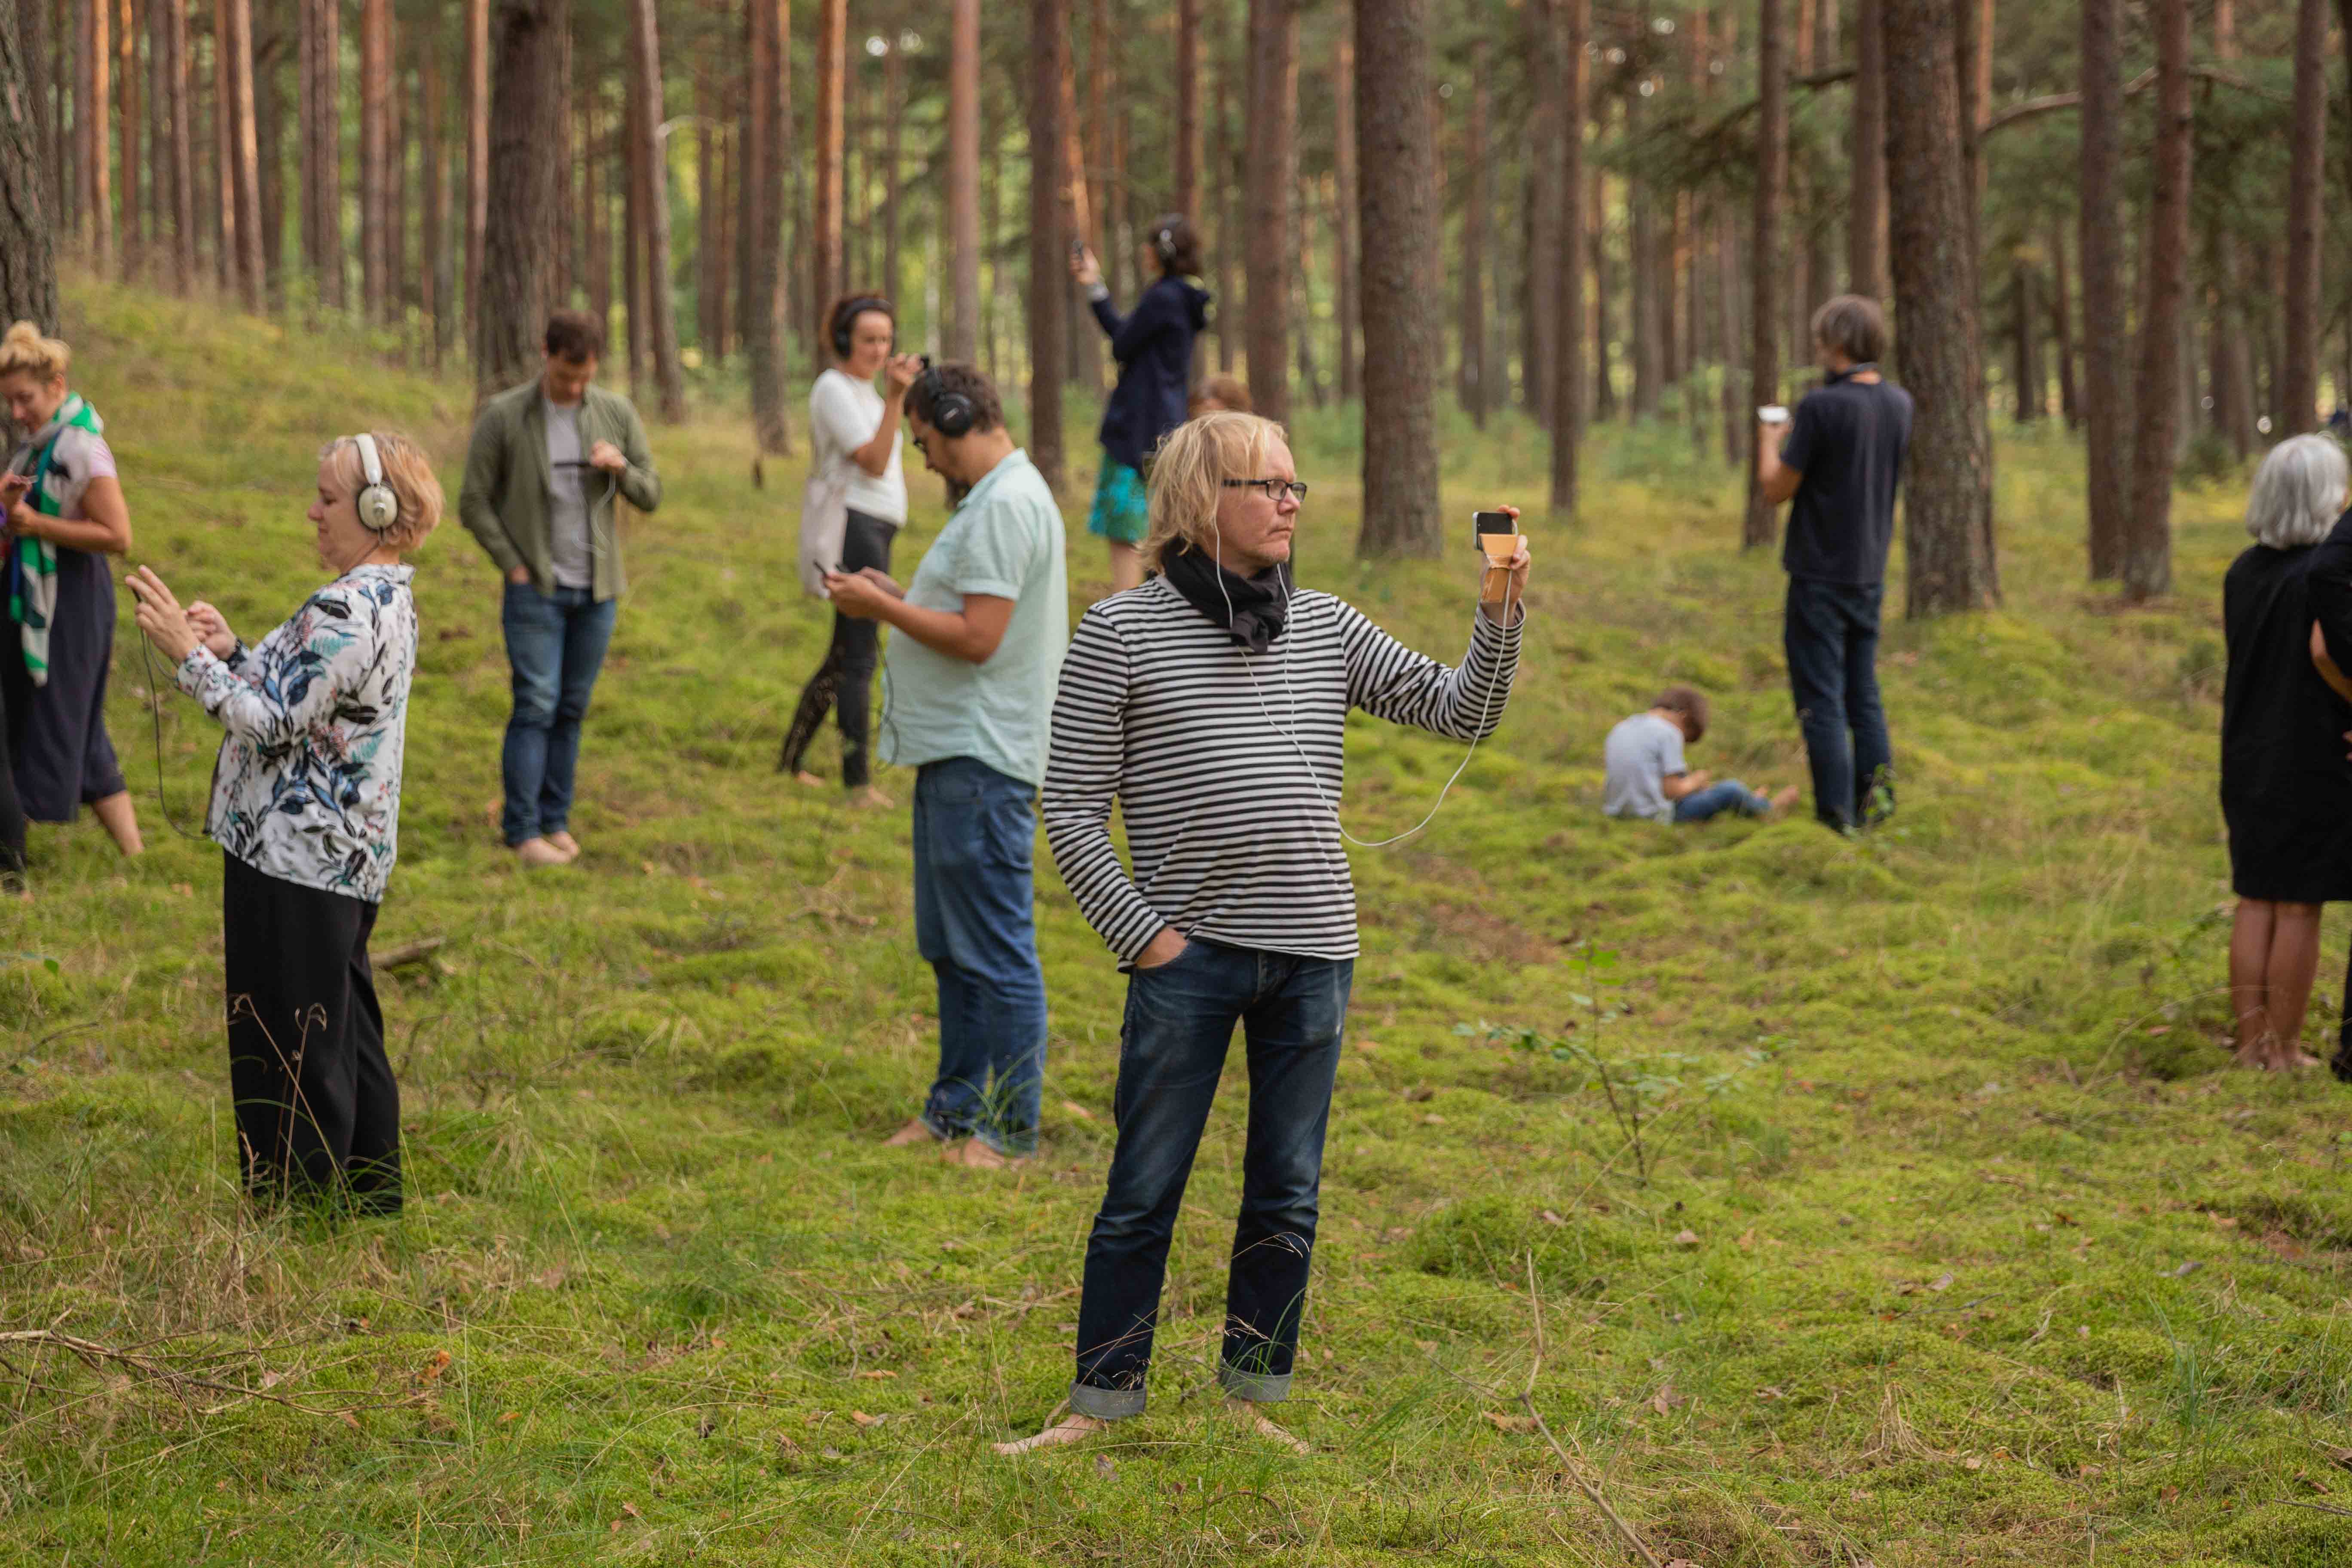 Participatory performance in forest by Paul Cegys. Photo by Andrej Vasilenko